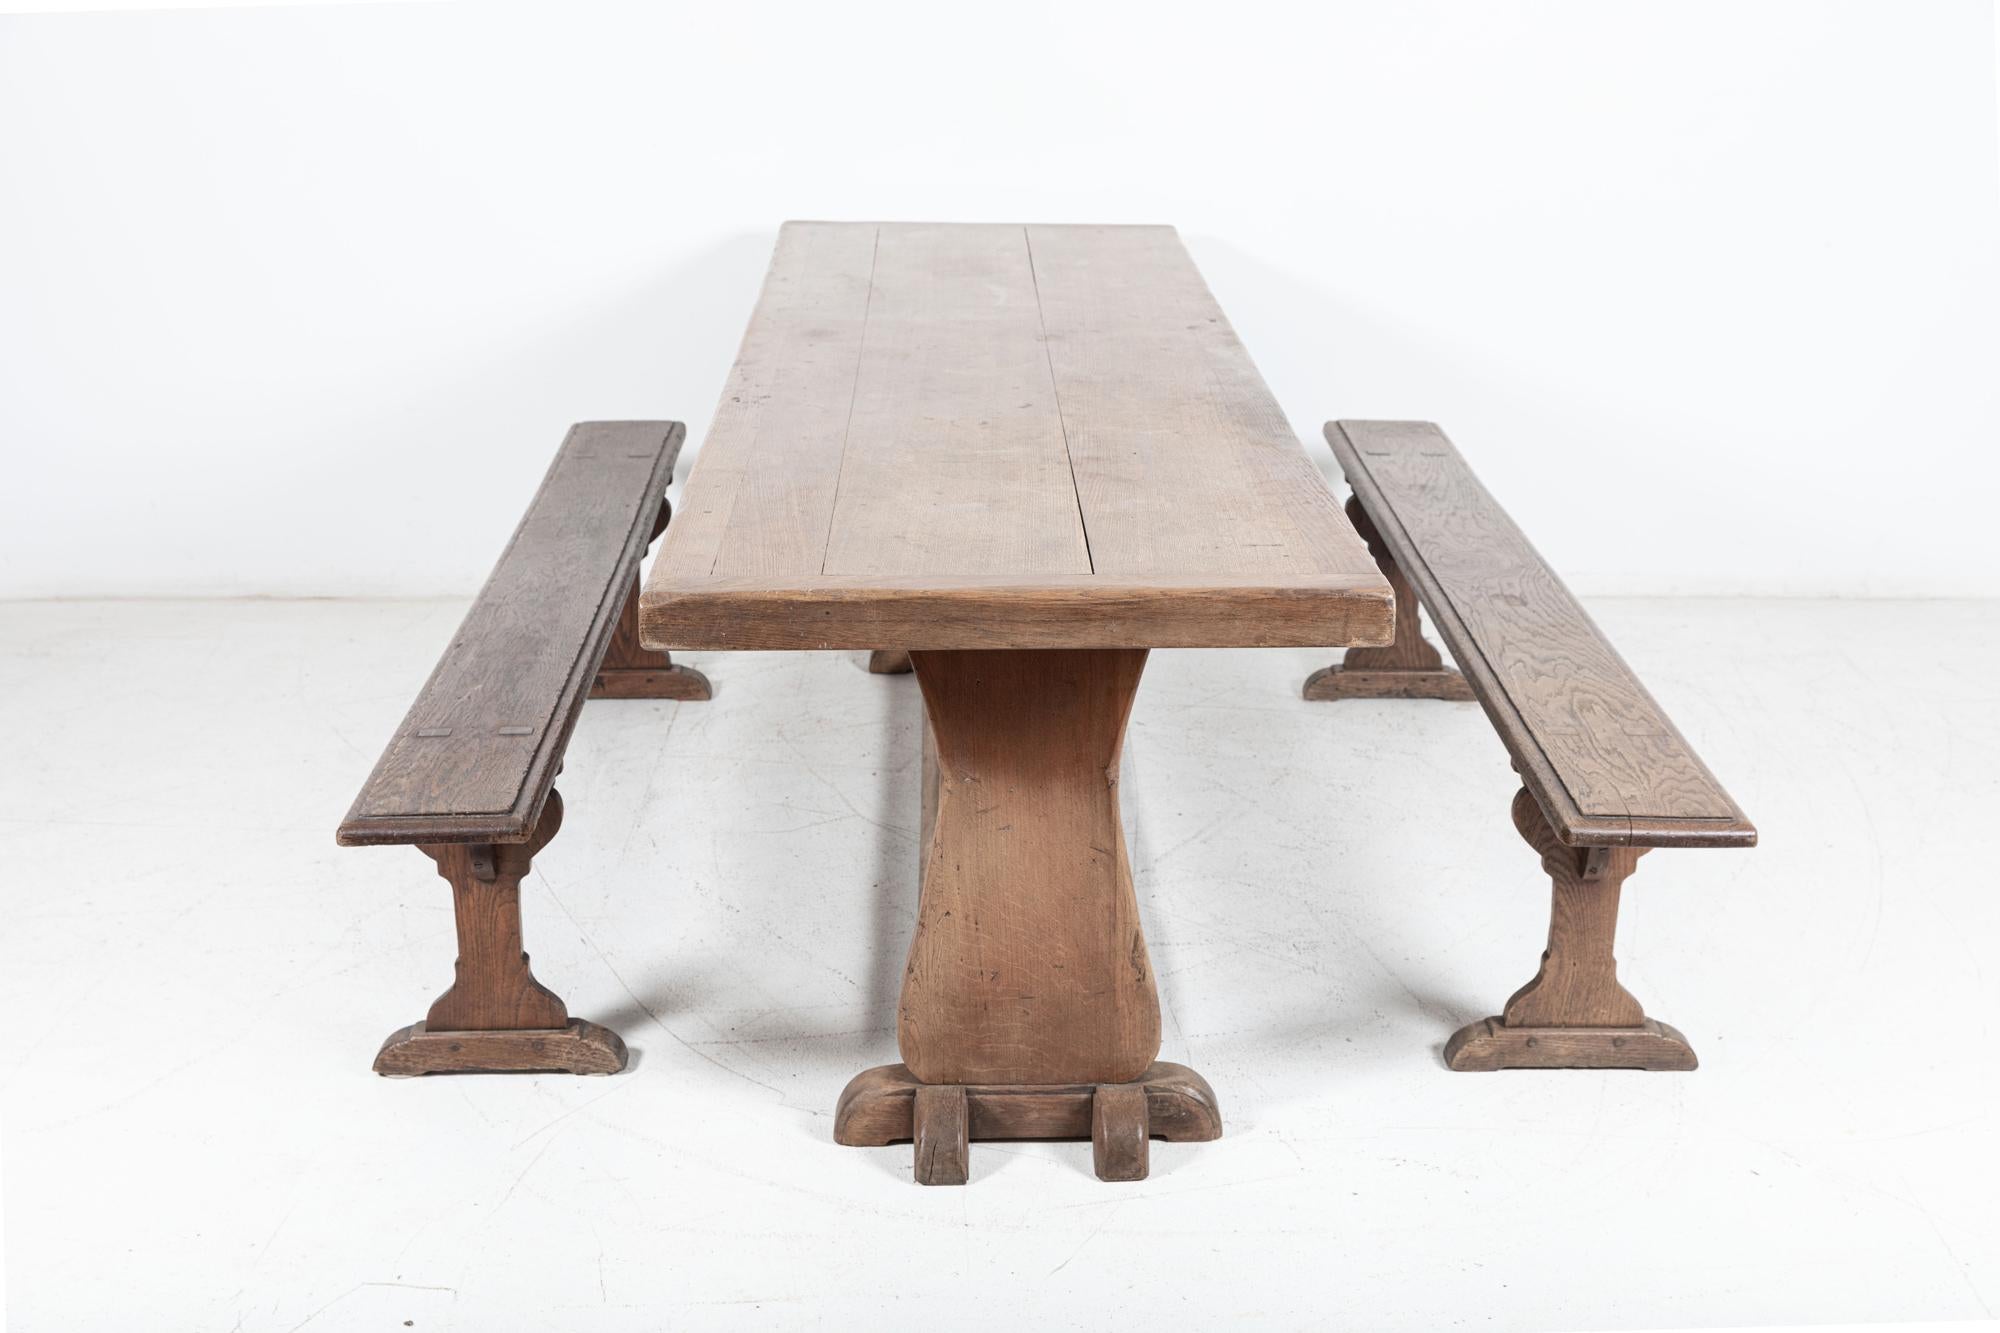 Circa Mid 20thC

Large English Oak Trestle Table with 6cm Thick Oak Top

sku 878

(benches available separate listing)

W240 x D72 x H76 cm
Floor to Apron 70 cm